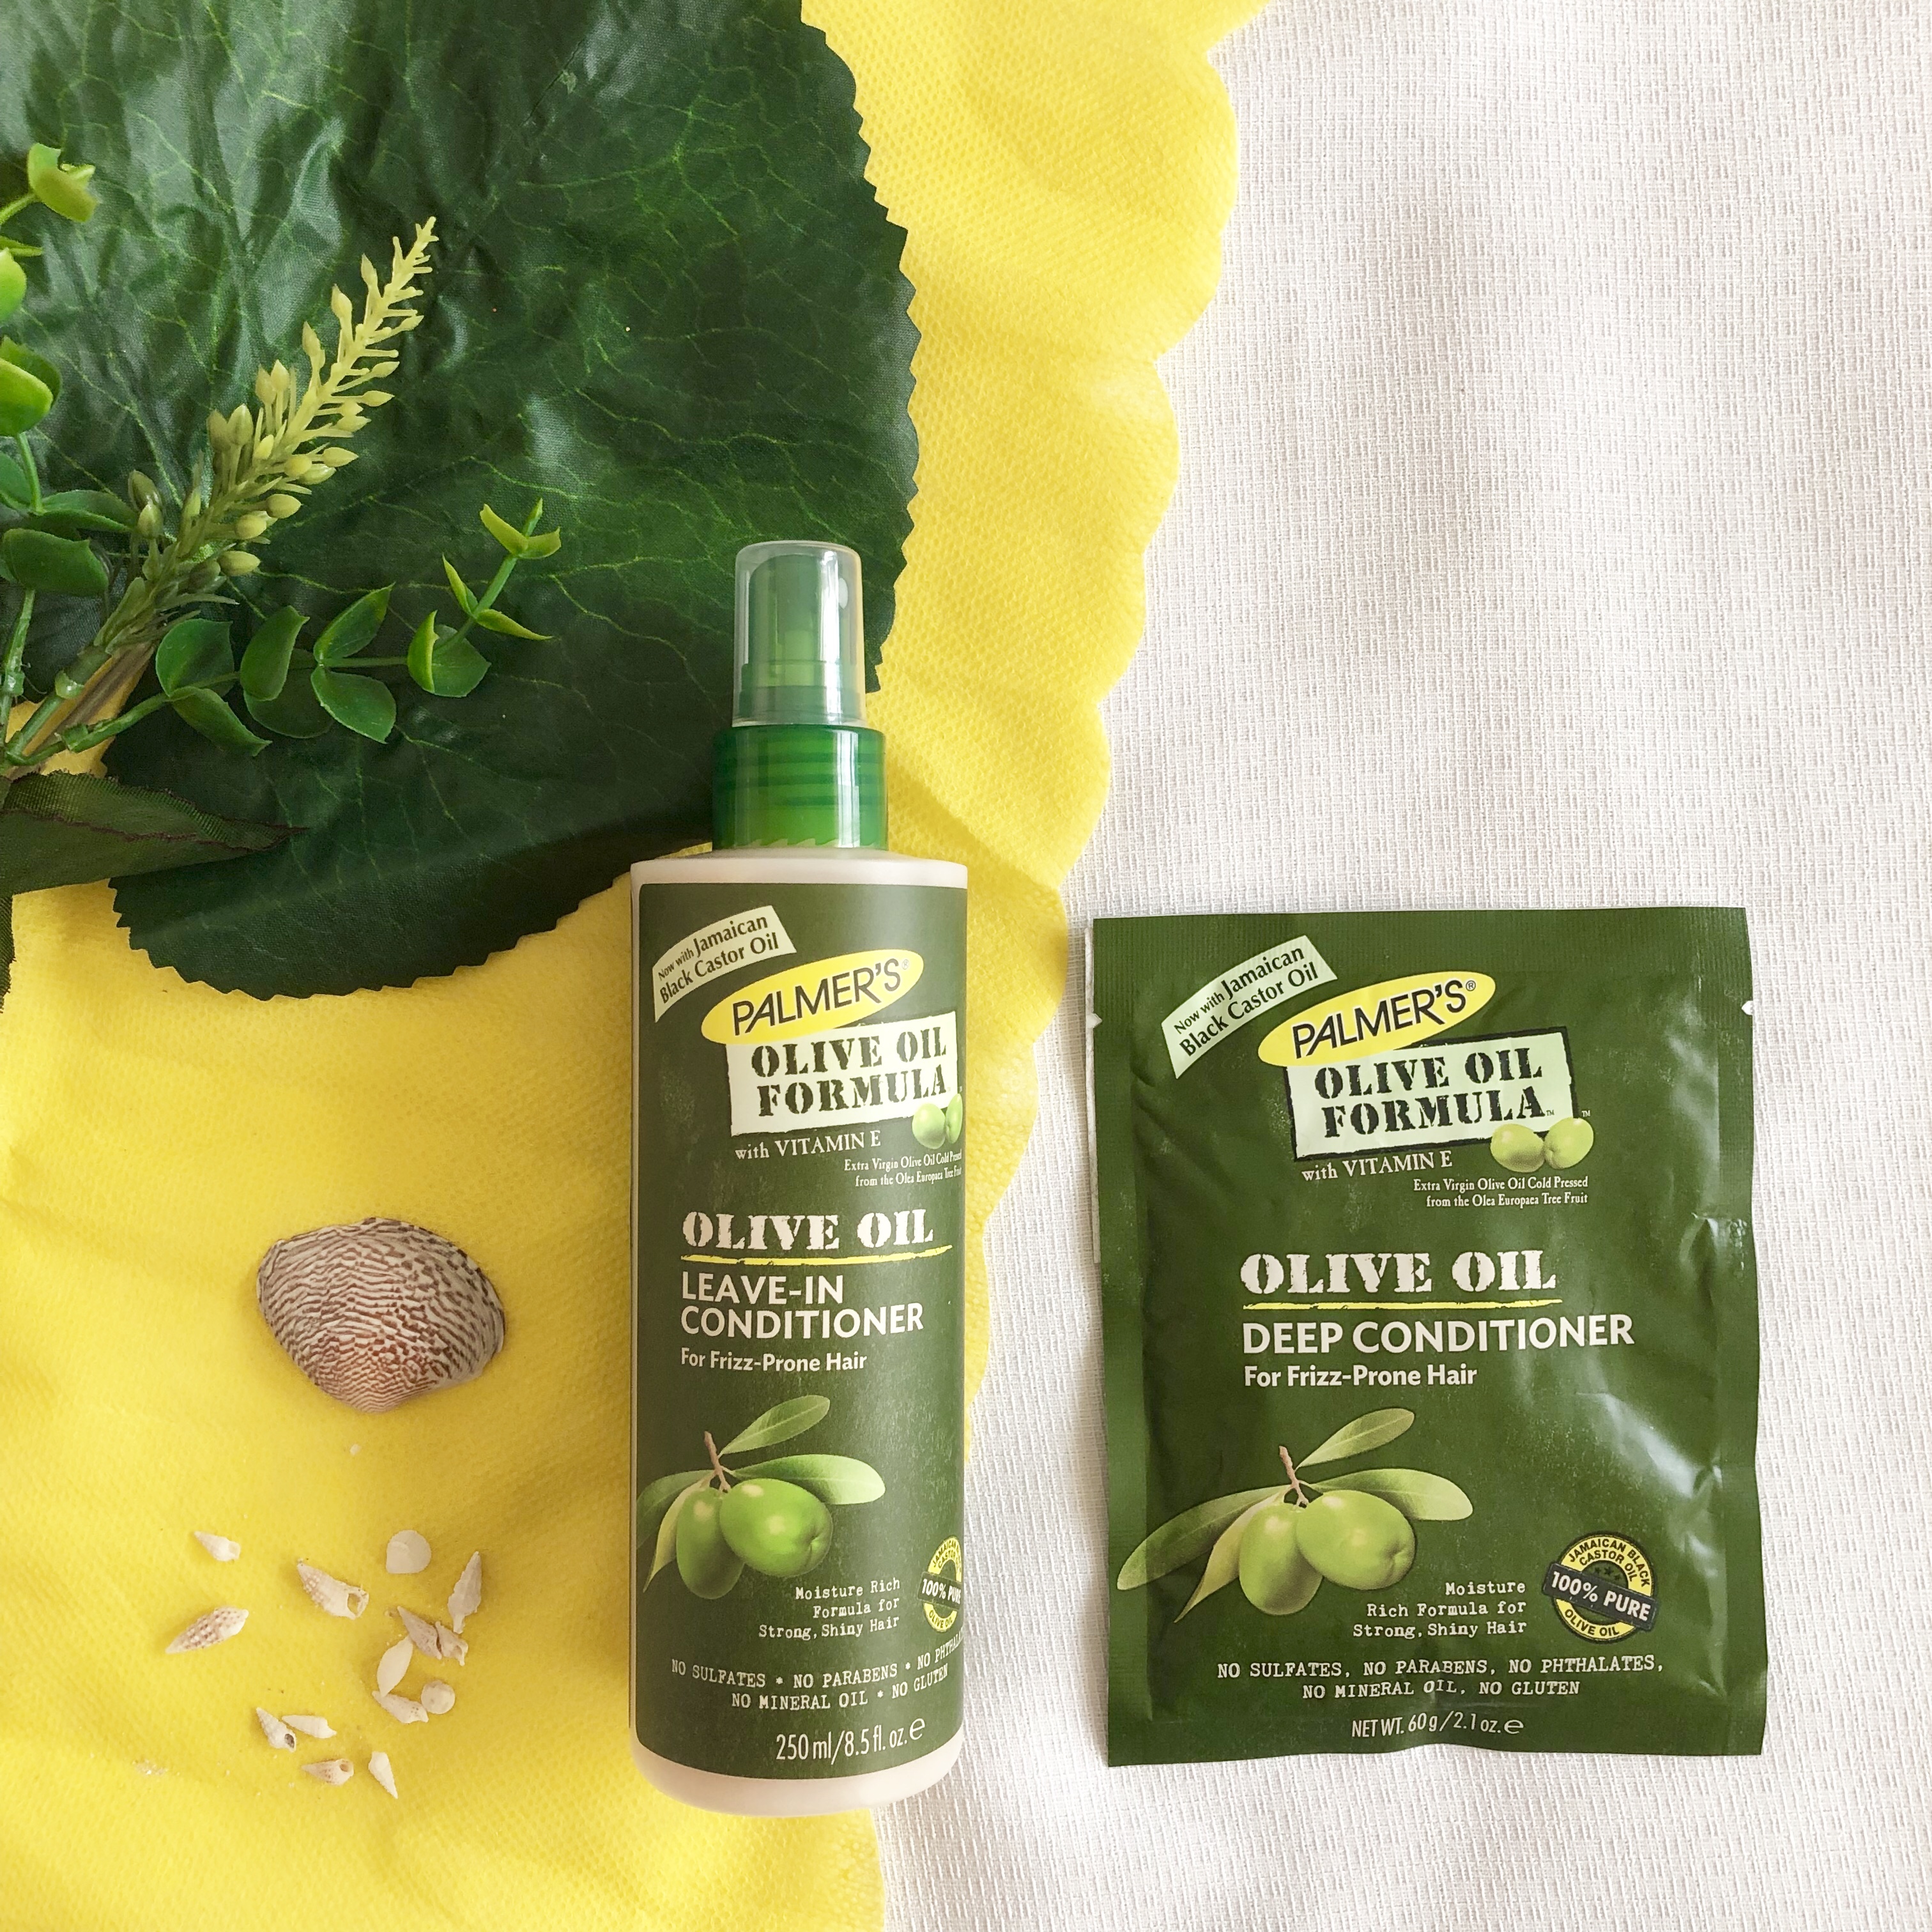 Palmer’s Olive Oil Formula Hair Care – Review